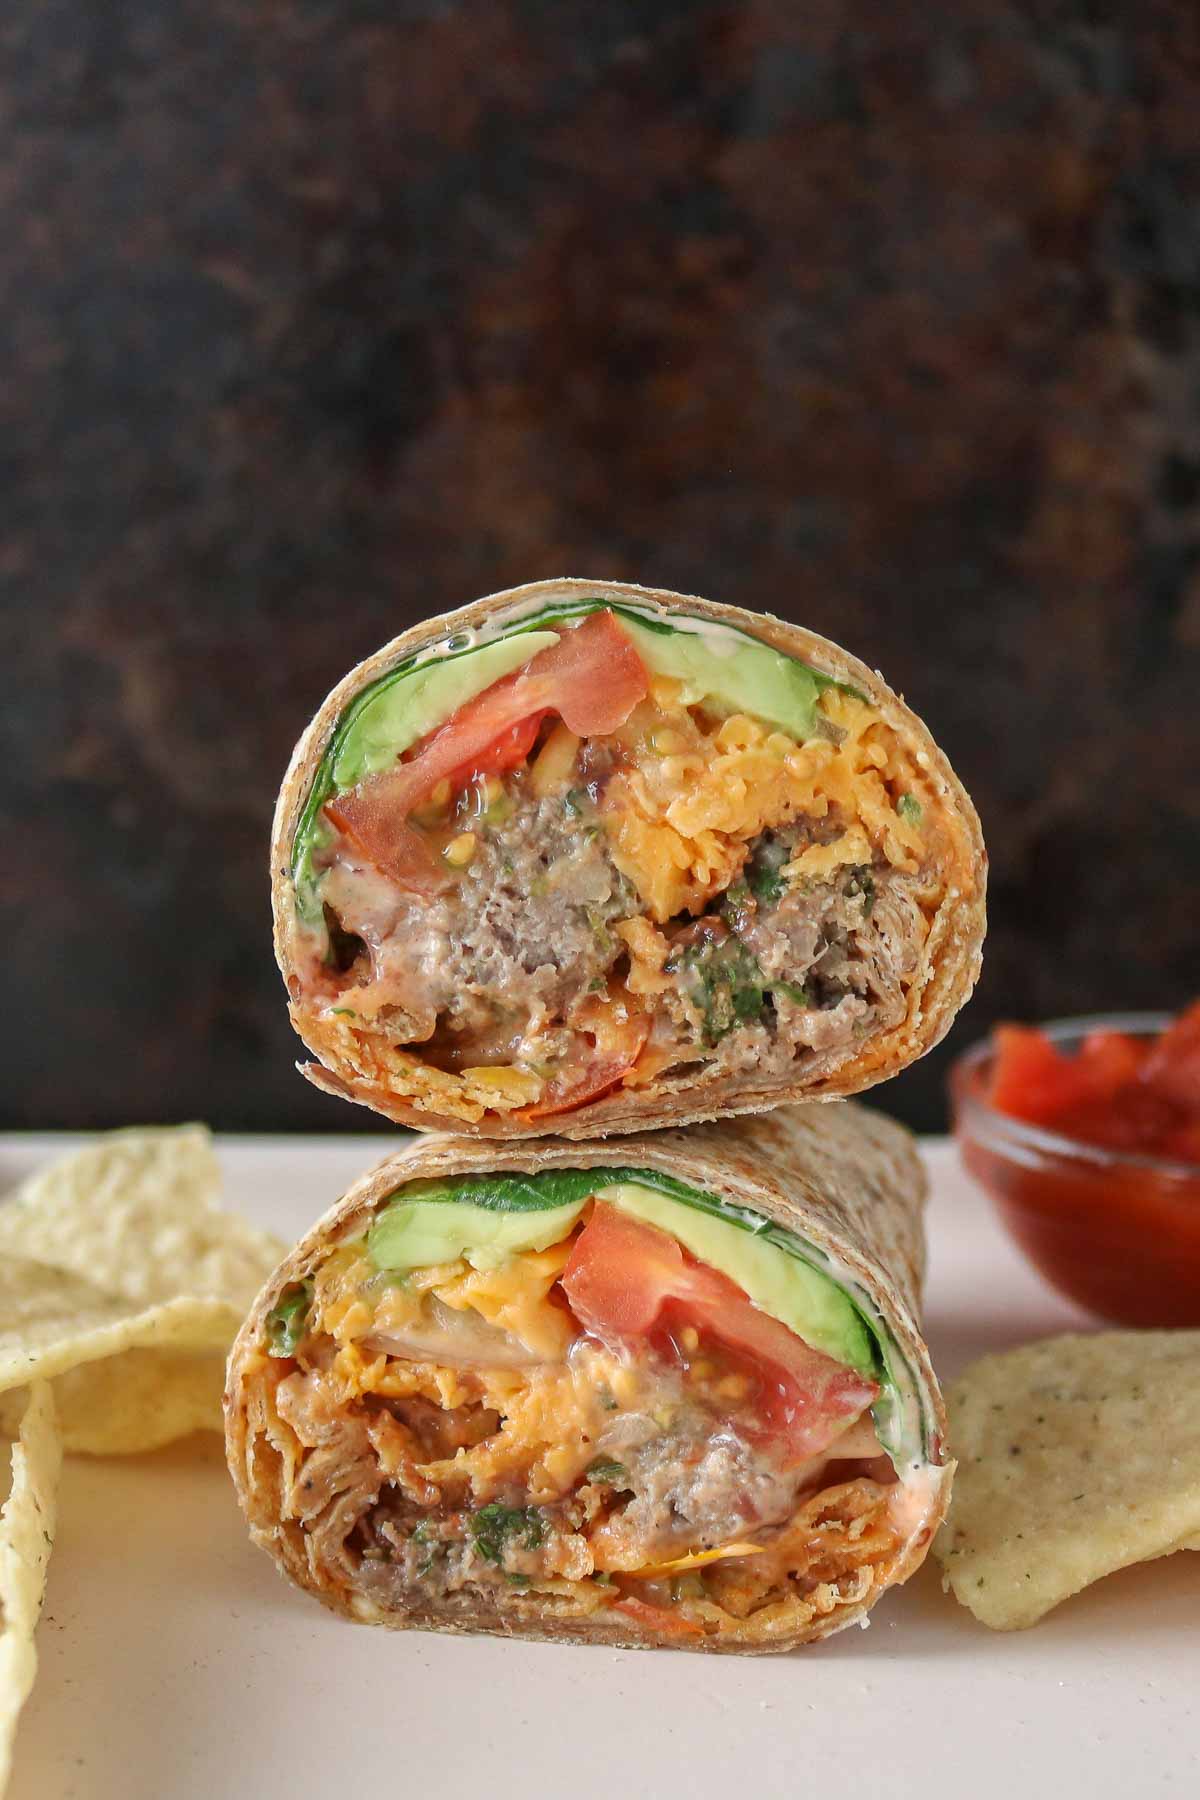 Two halves of a meatball wrap stacked on a plate with tortilla chips and dish of salsa.